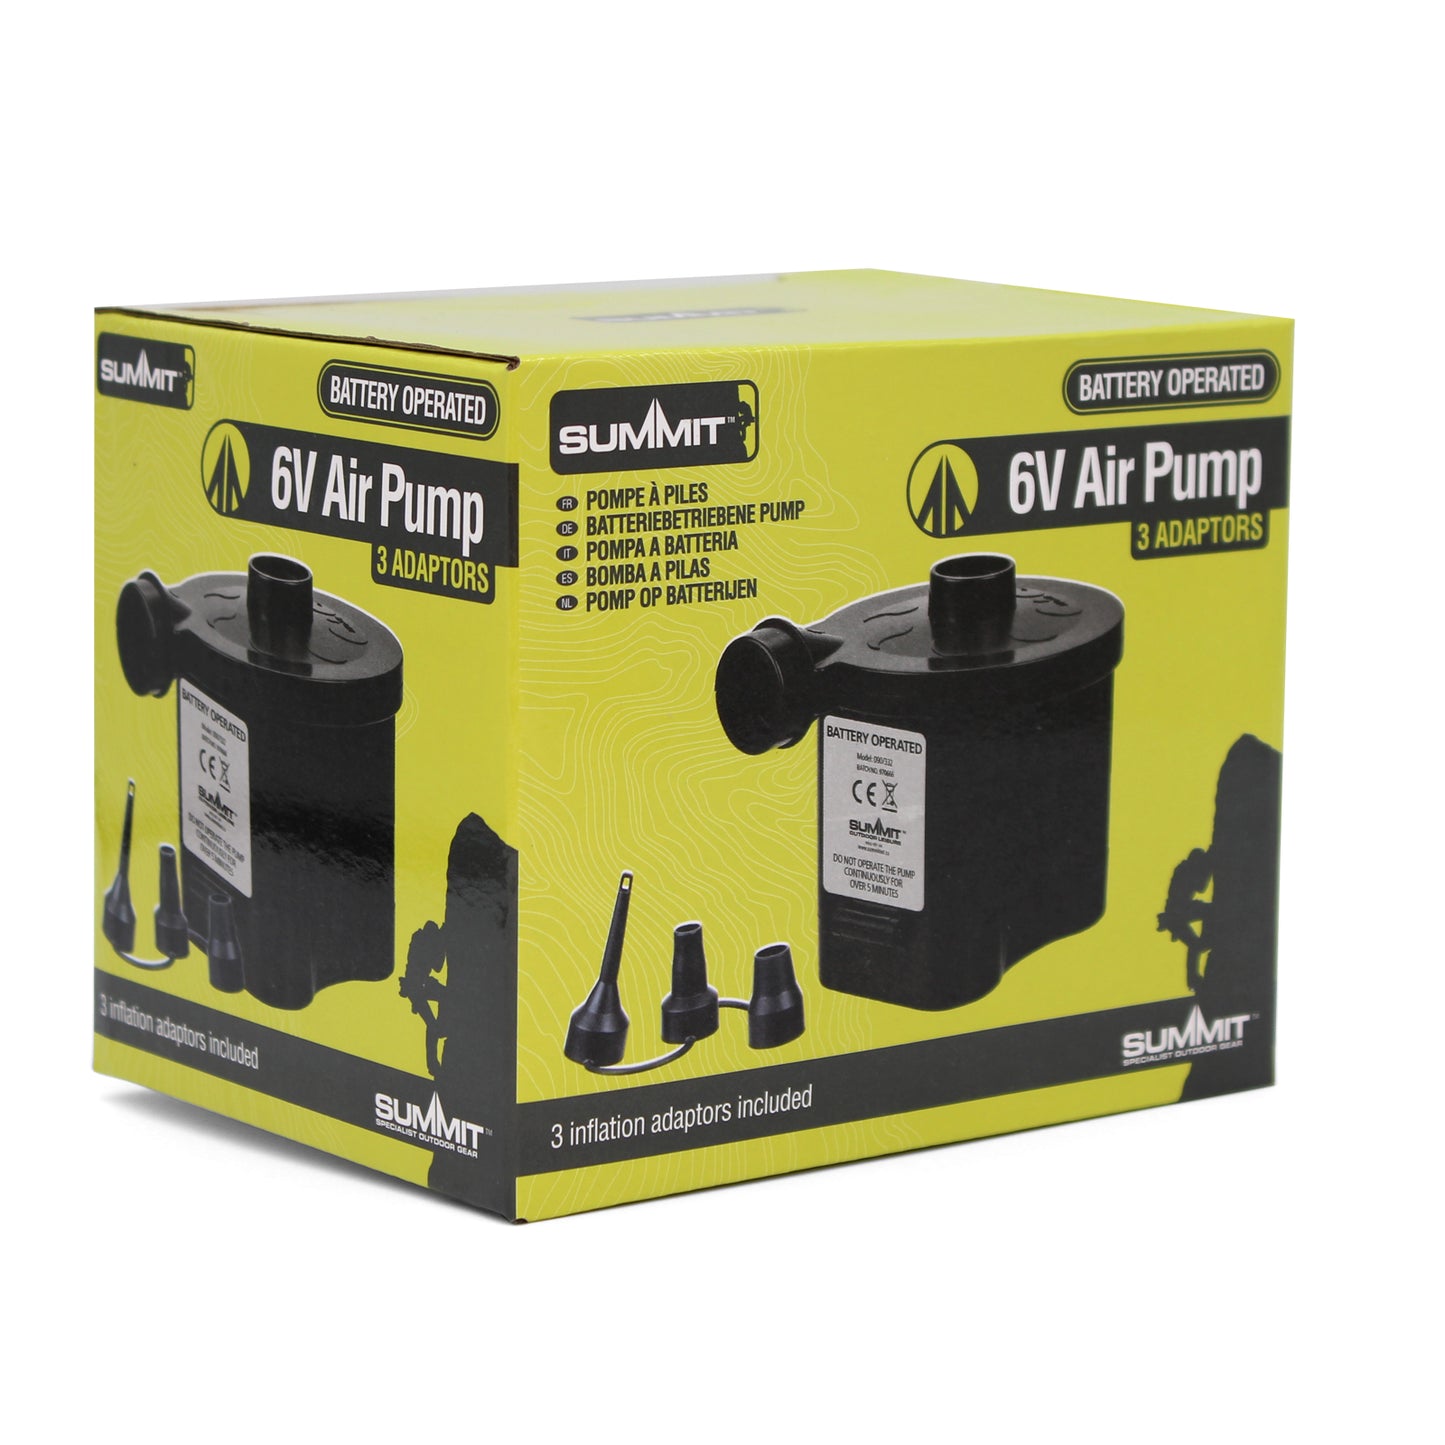 6V Air Pump Battery Operated with 3 Adapters in Box